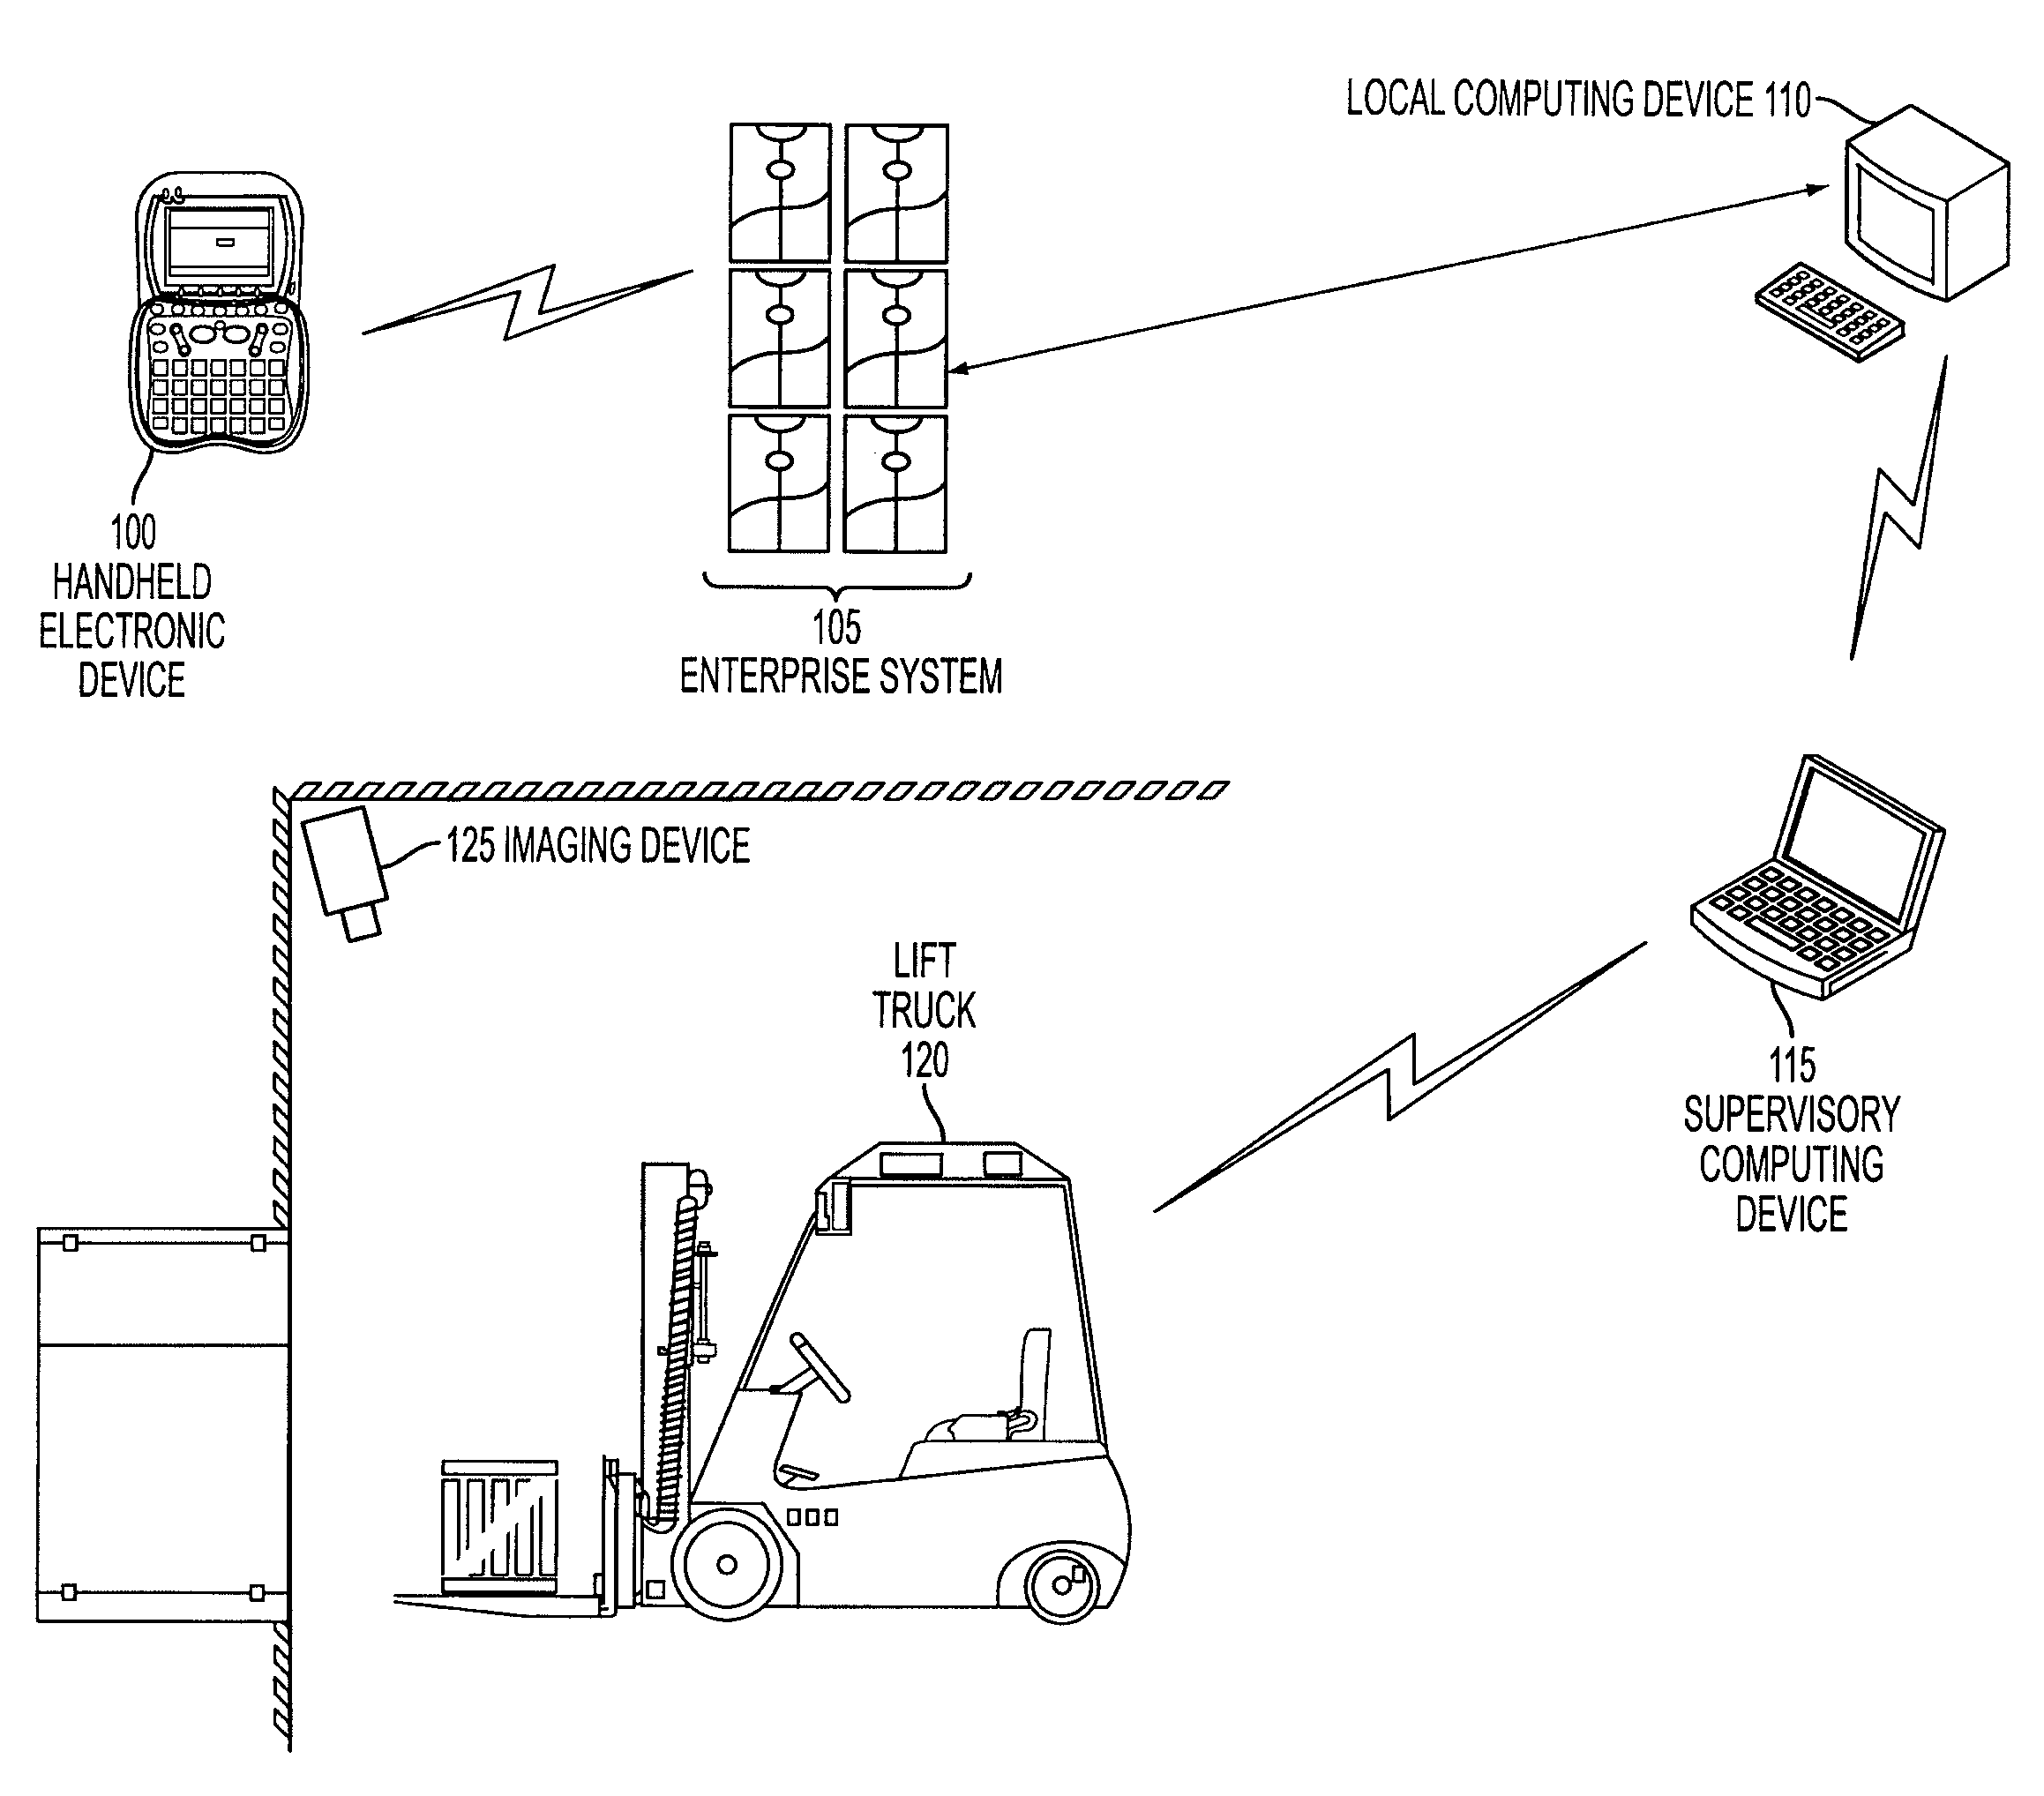 Systems and methods for freight tracking and monitoring